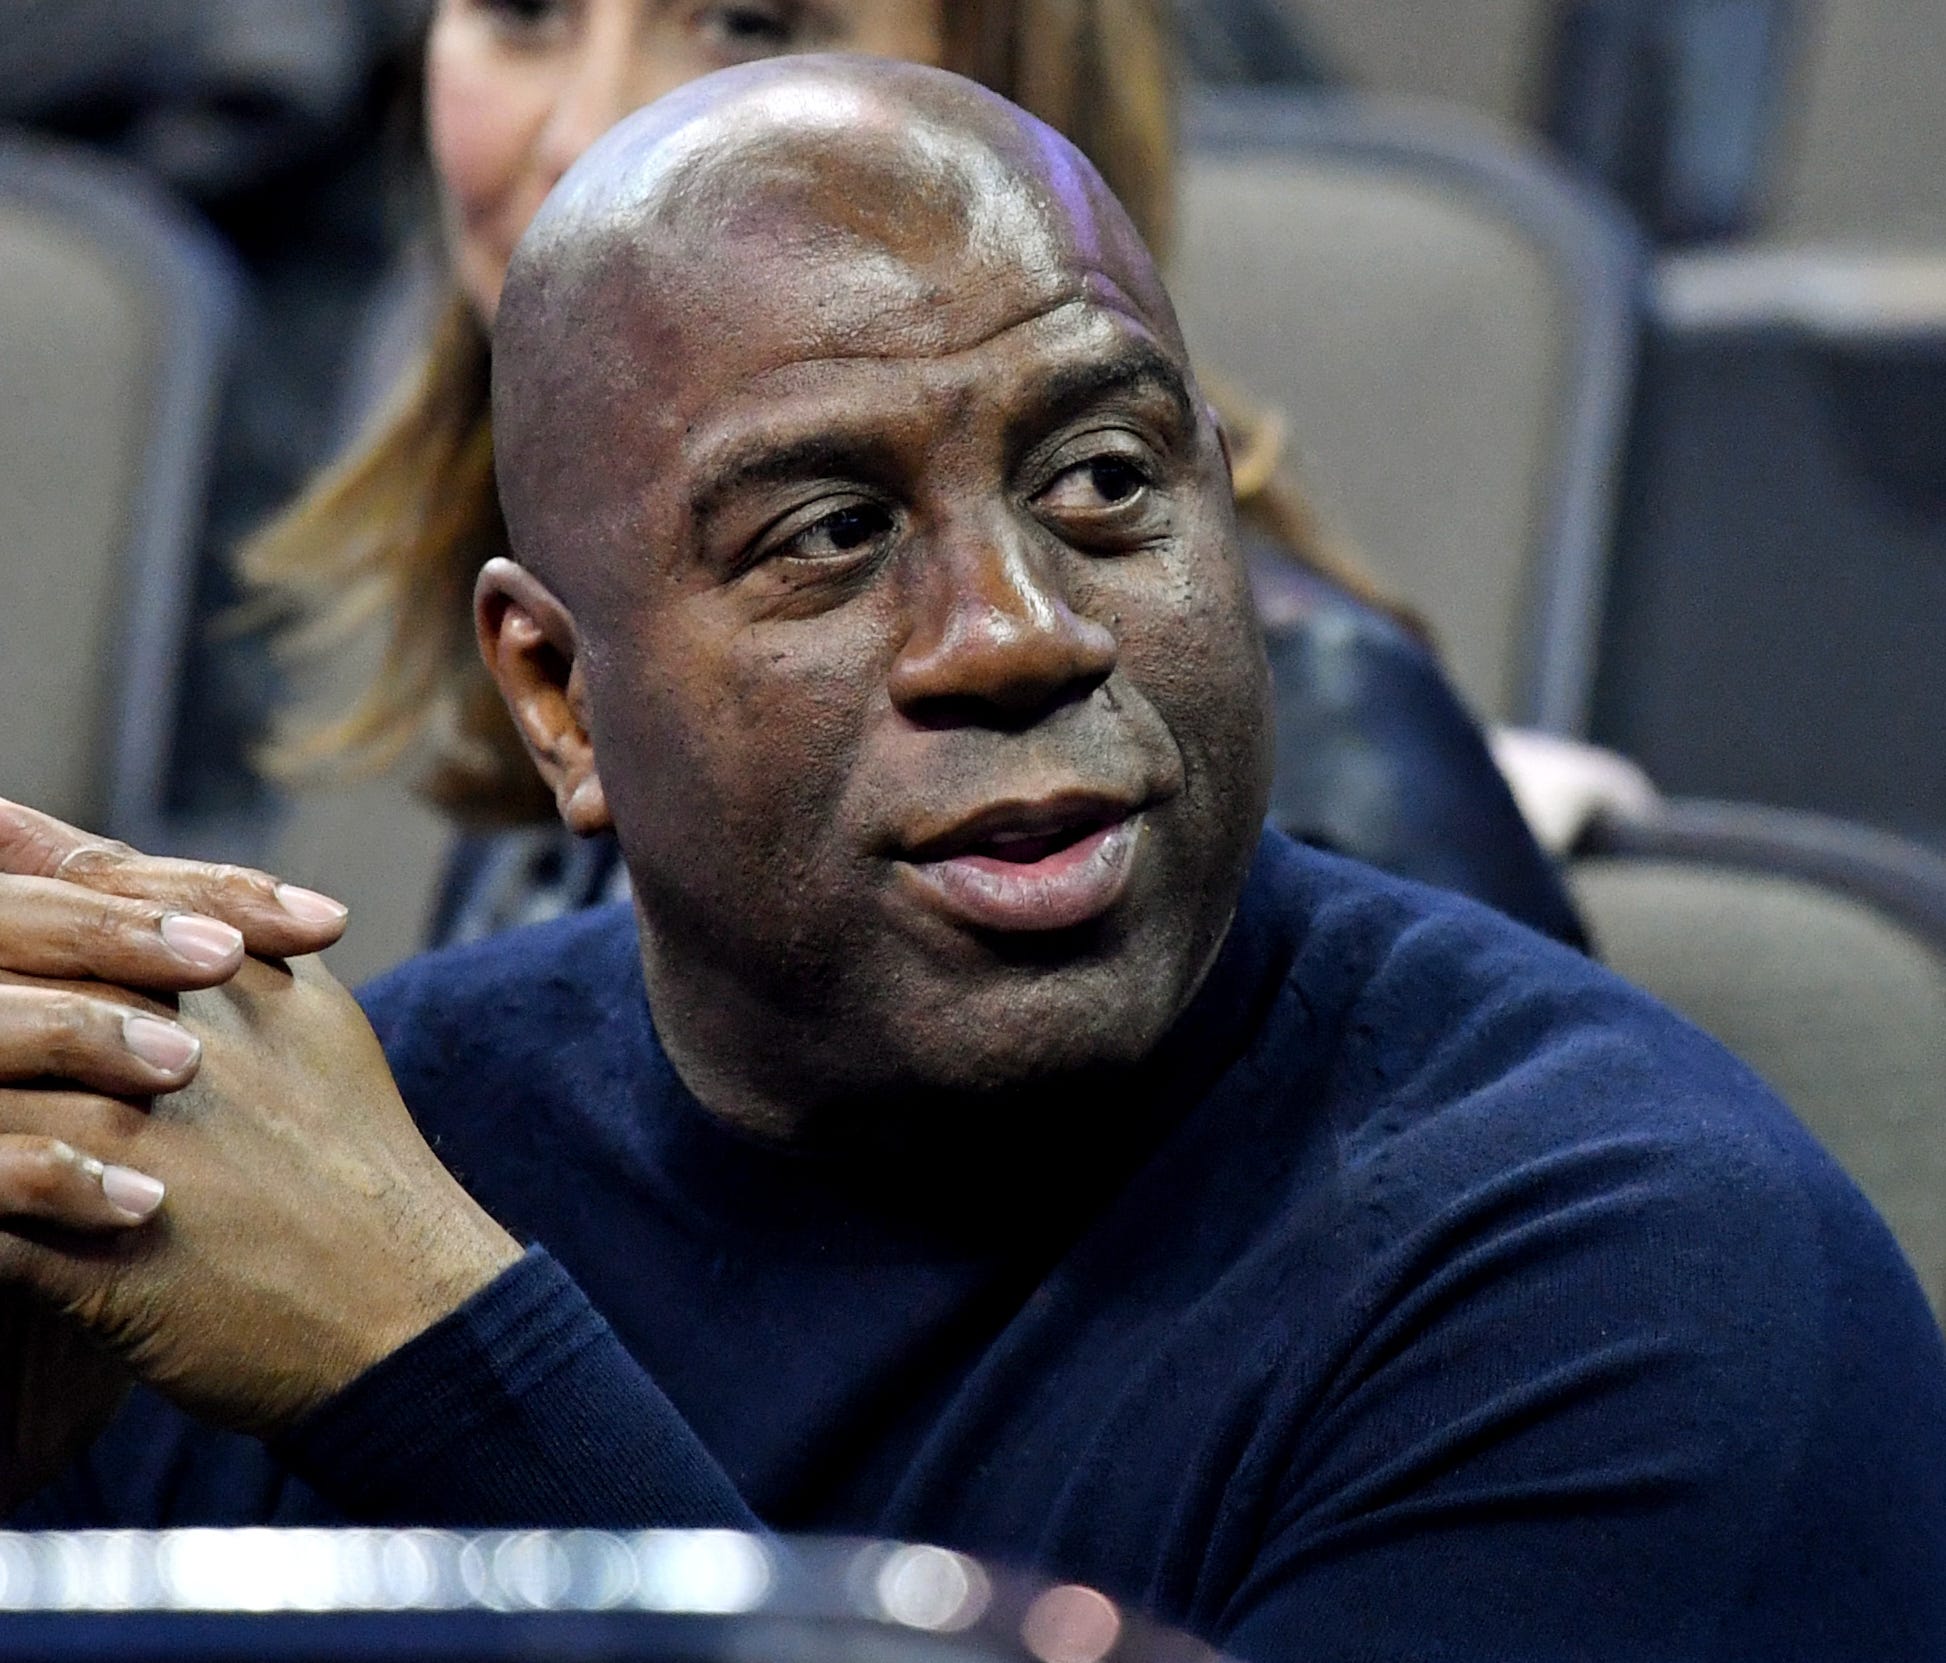 Magic Johnson watches during the first half between the Clemson Tigers and the Kansas Jayhawks in the semifinals of the Midwest regional of the 2018 NCAA Tournament.